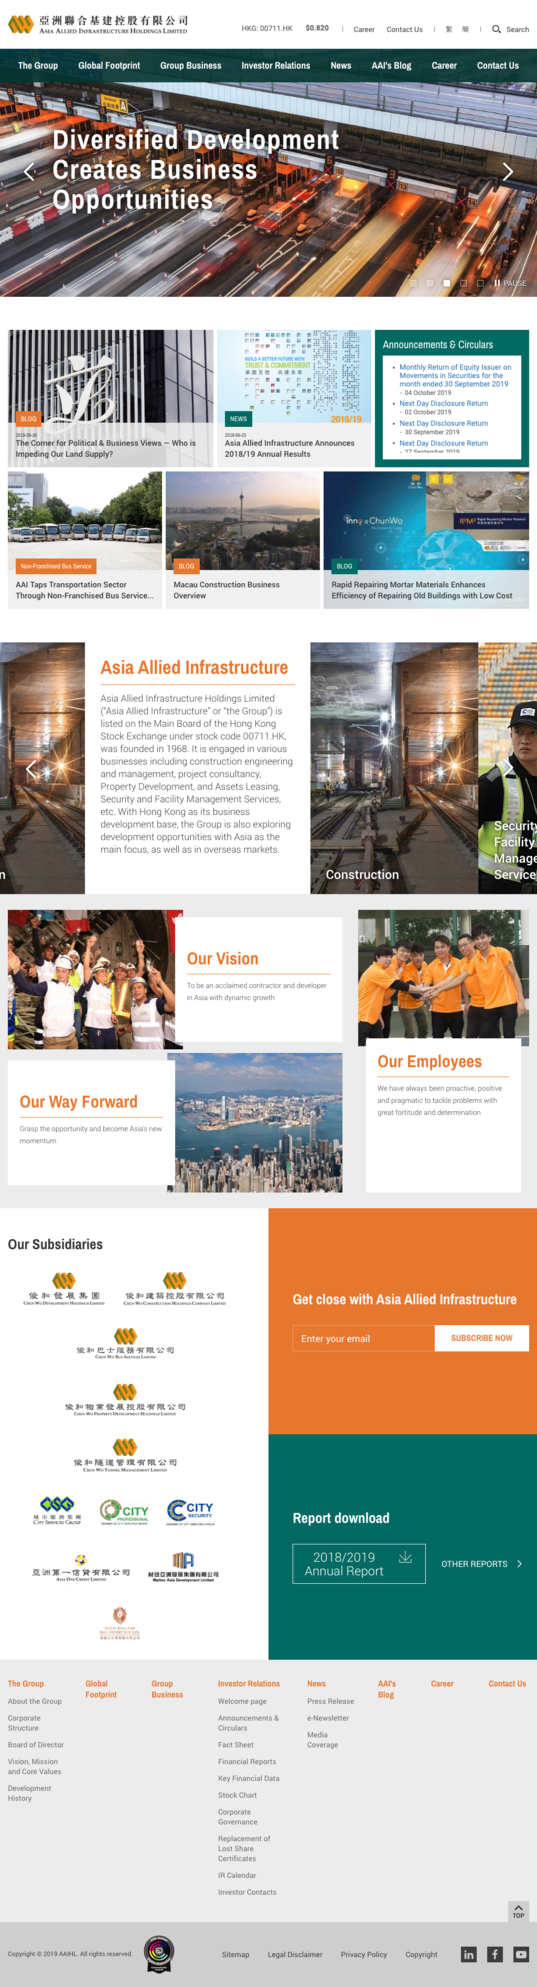 Asia Allied Infrastructure Holdings Limited website screenshot for tablet version 1 of 5